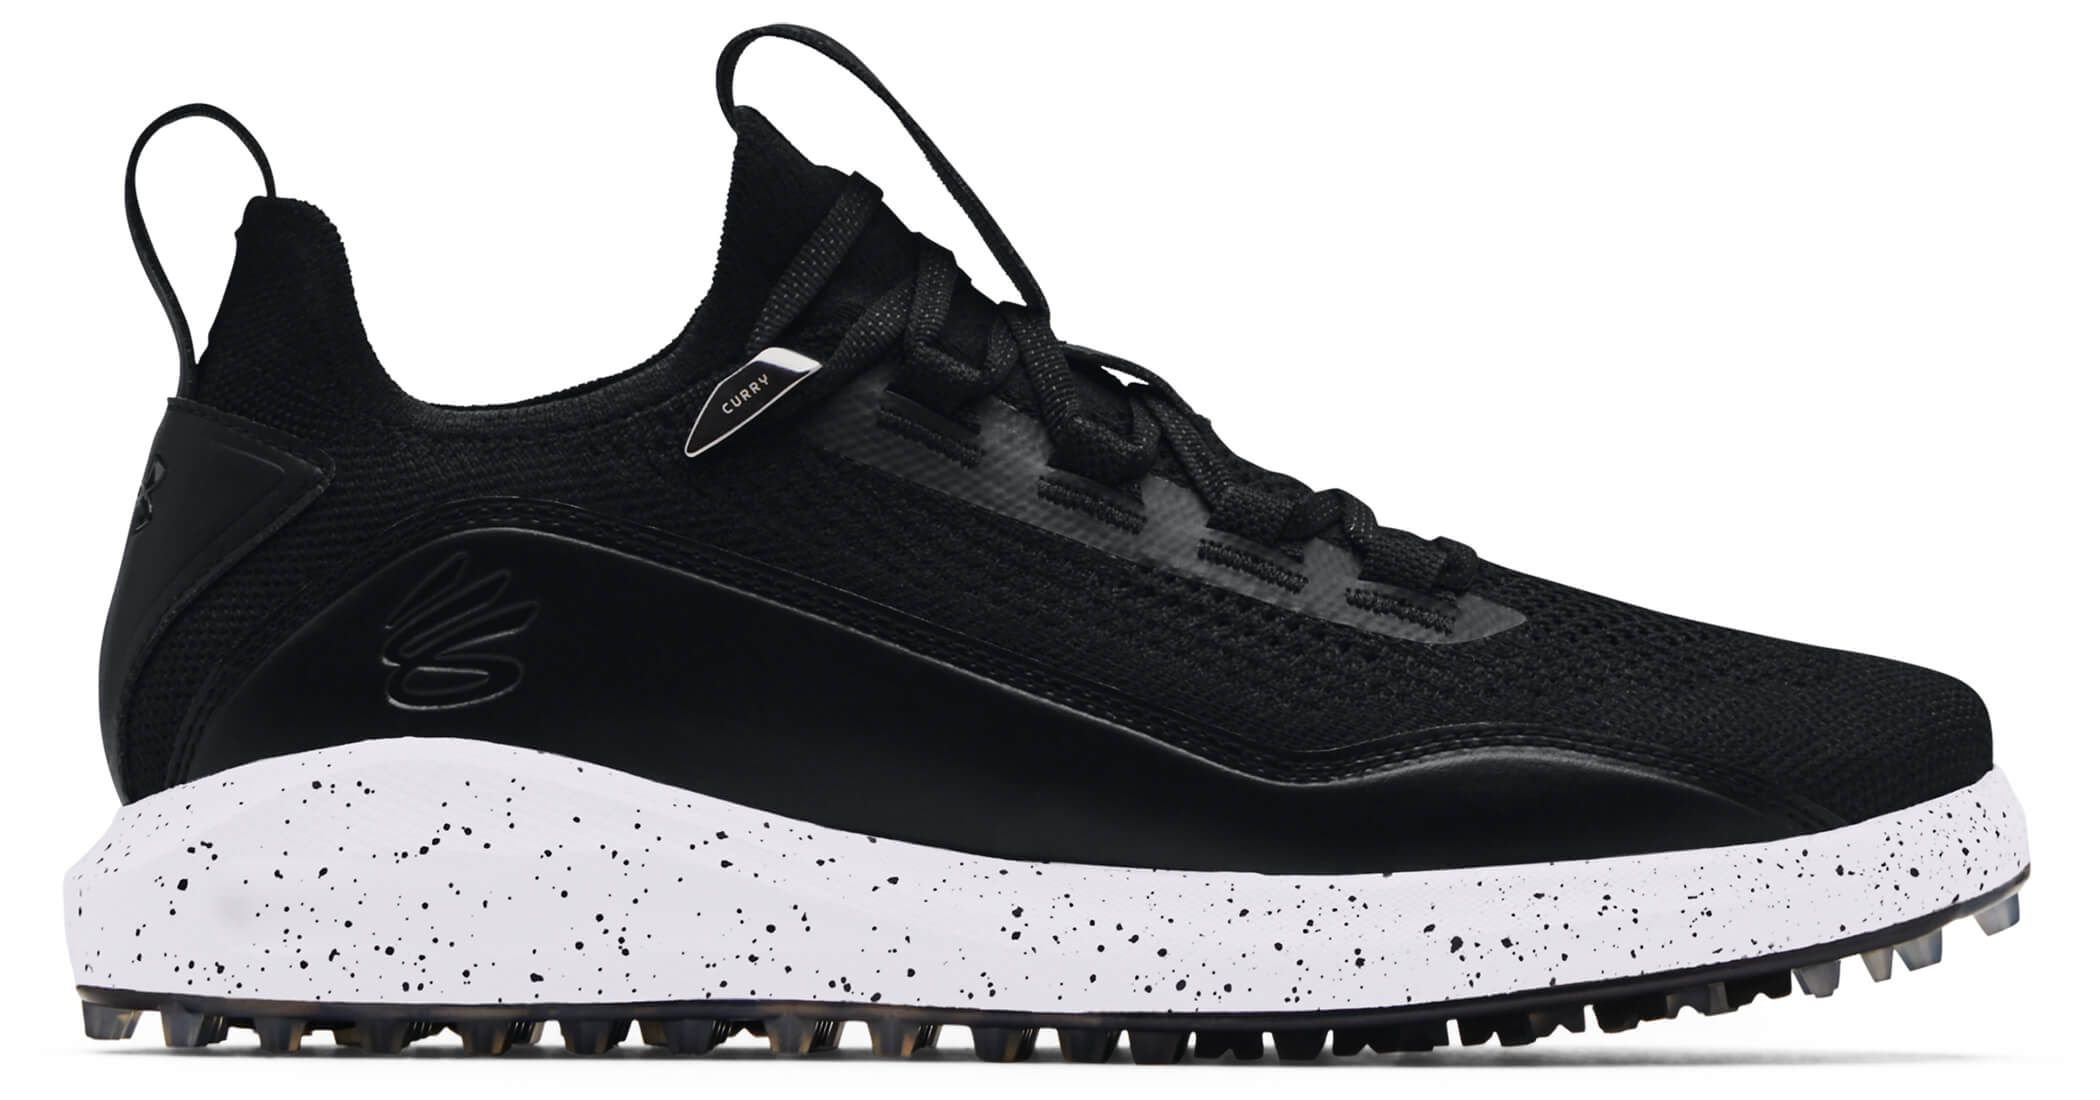 steph curry golf shoes